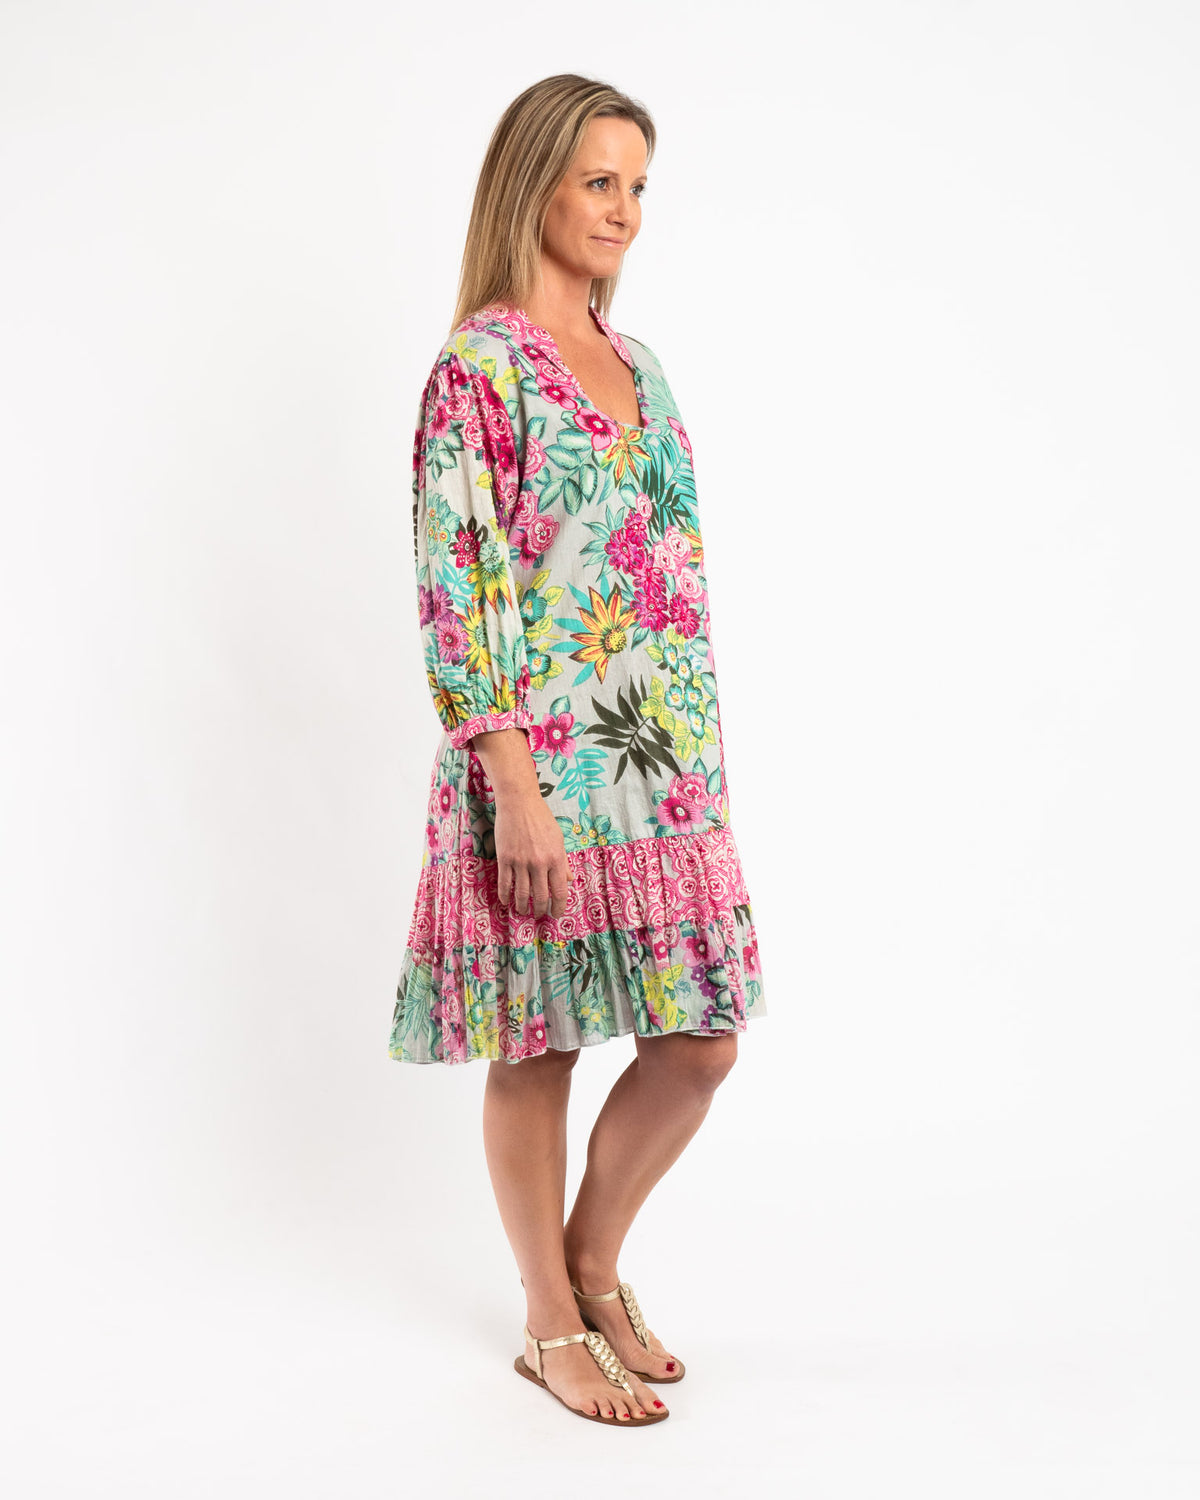 Embroidered Tunic Dress in Pink and Pale Green Floral